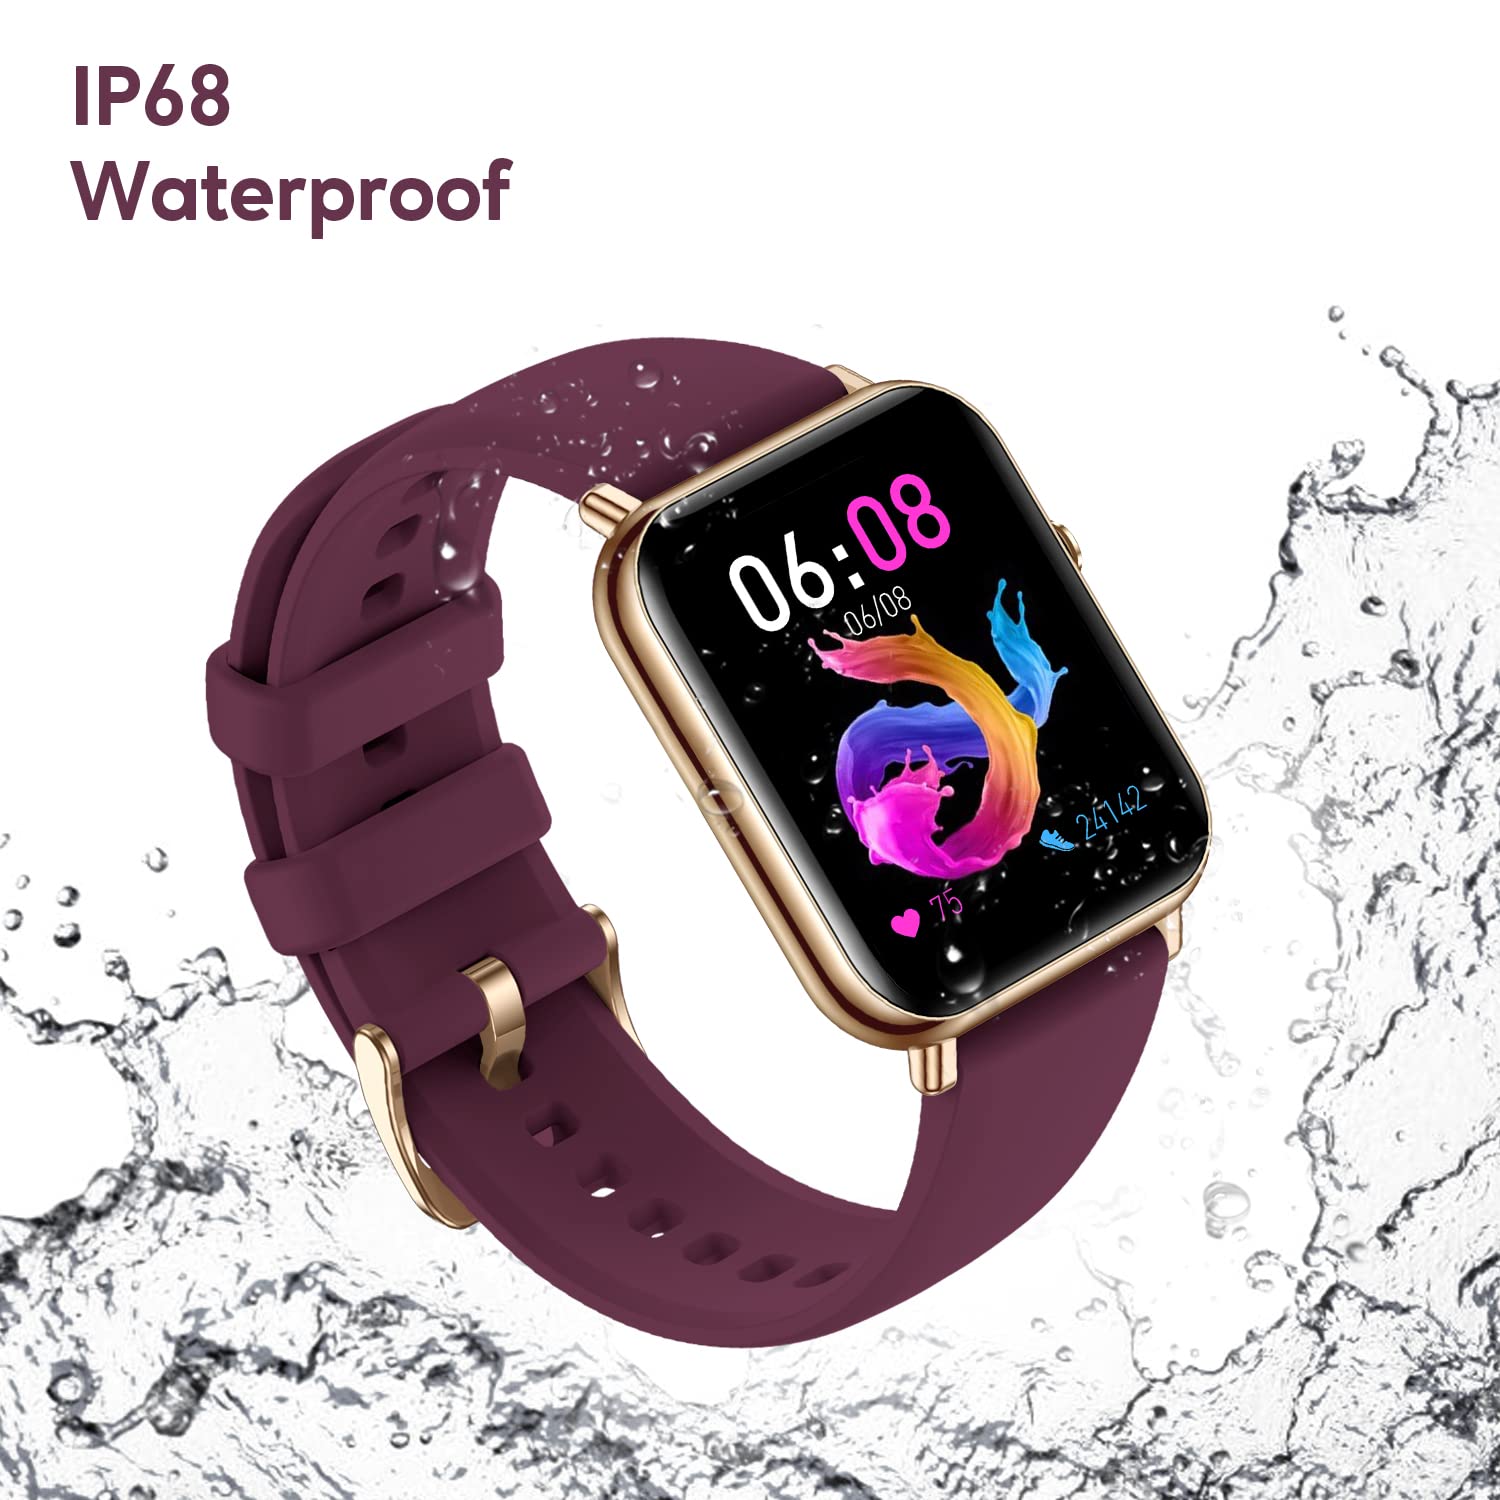 IMFRCHCS Smart Watch, Fitness Tracker Watch with Heart Rate Monitor, Activity Tracker with Sleep and Blood Oxygen Monitor, IP68 Waterproof Pedometer Watch for Kids Men Women for Android IPhone